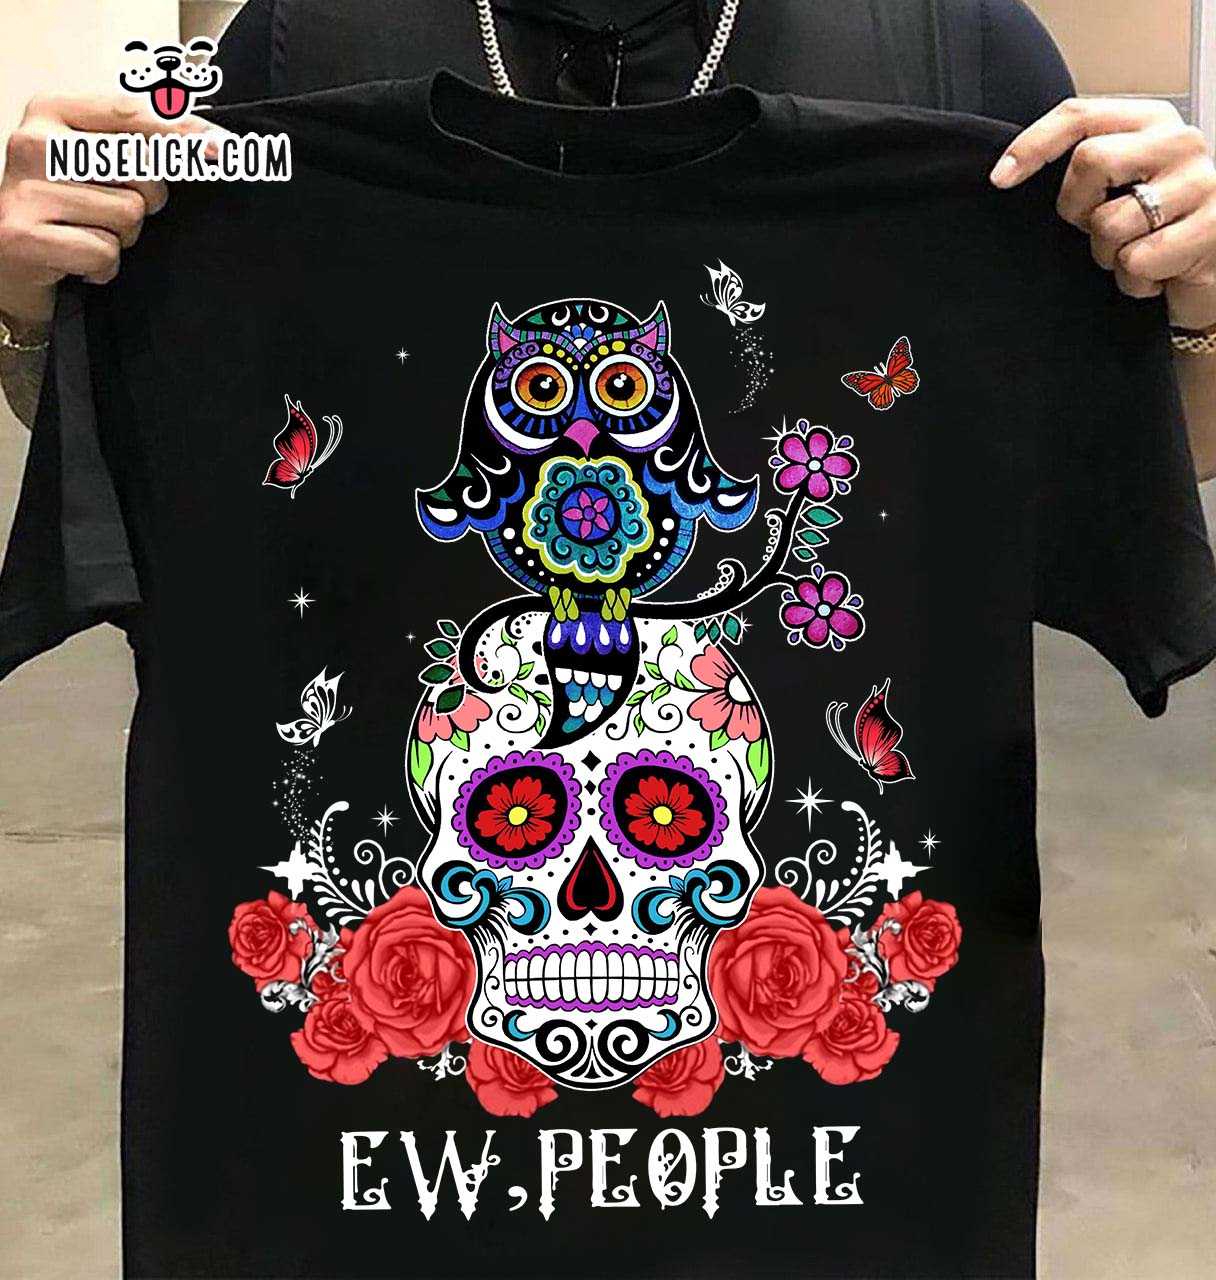 Ew people - Hate seeing people, Mexican skull and owl